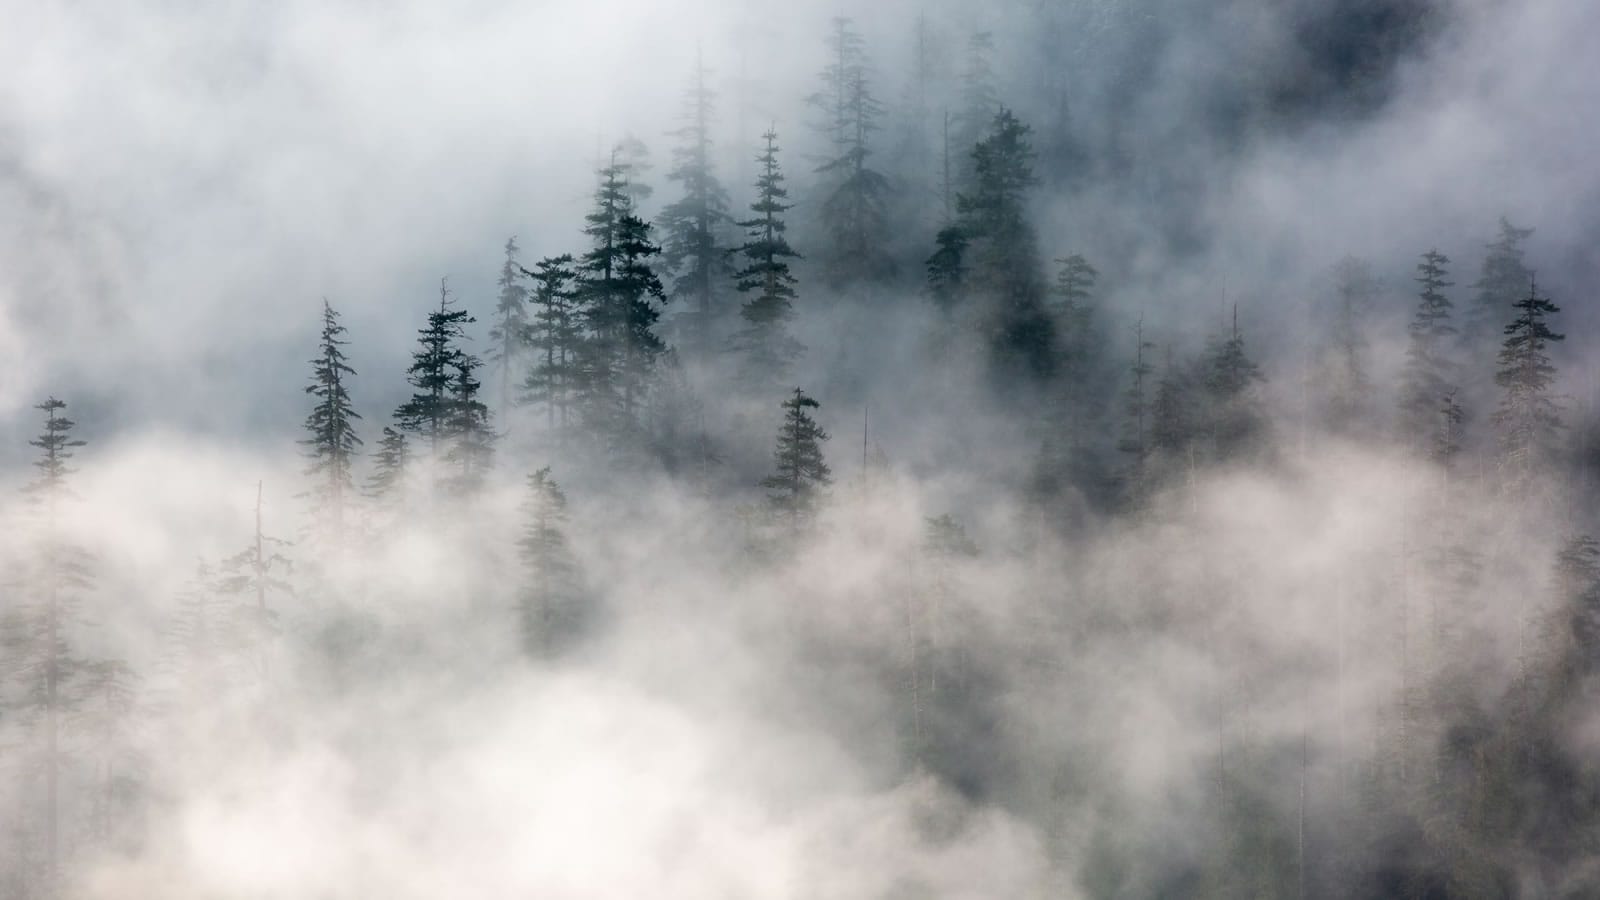 Fog in forest